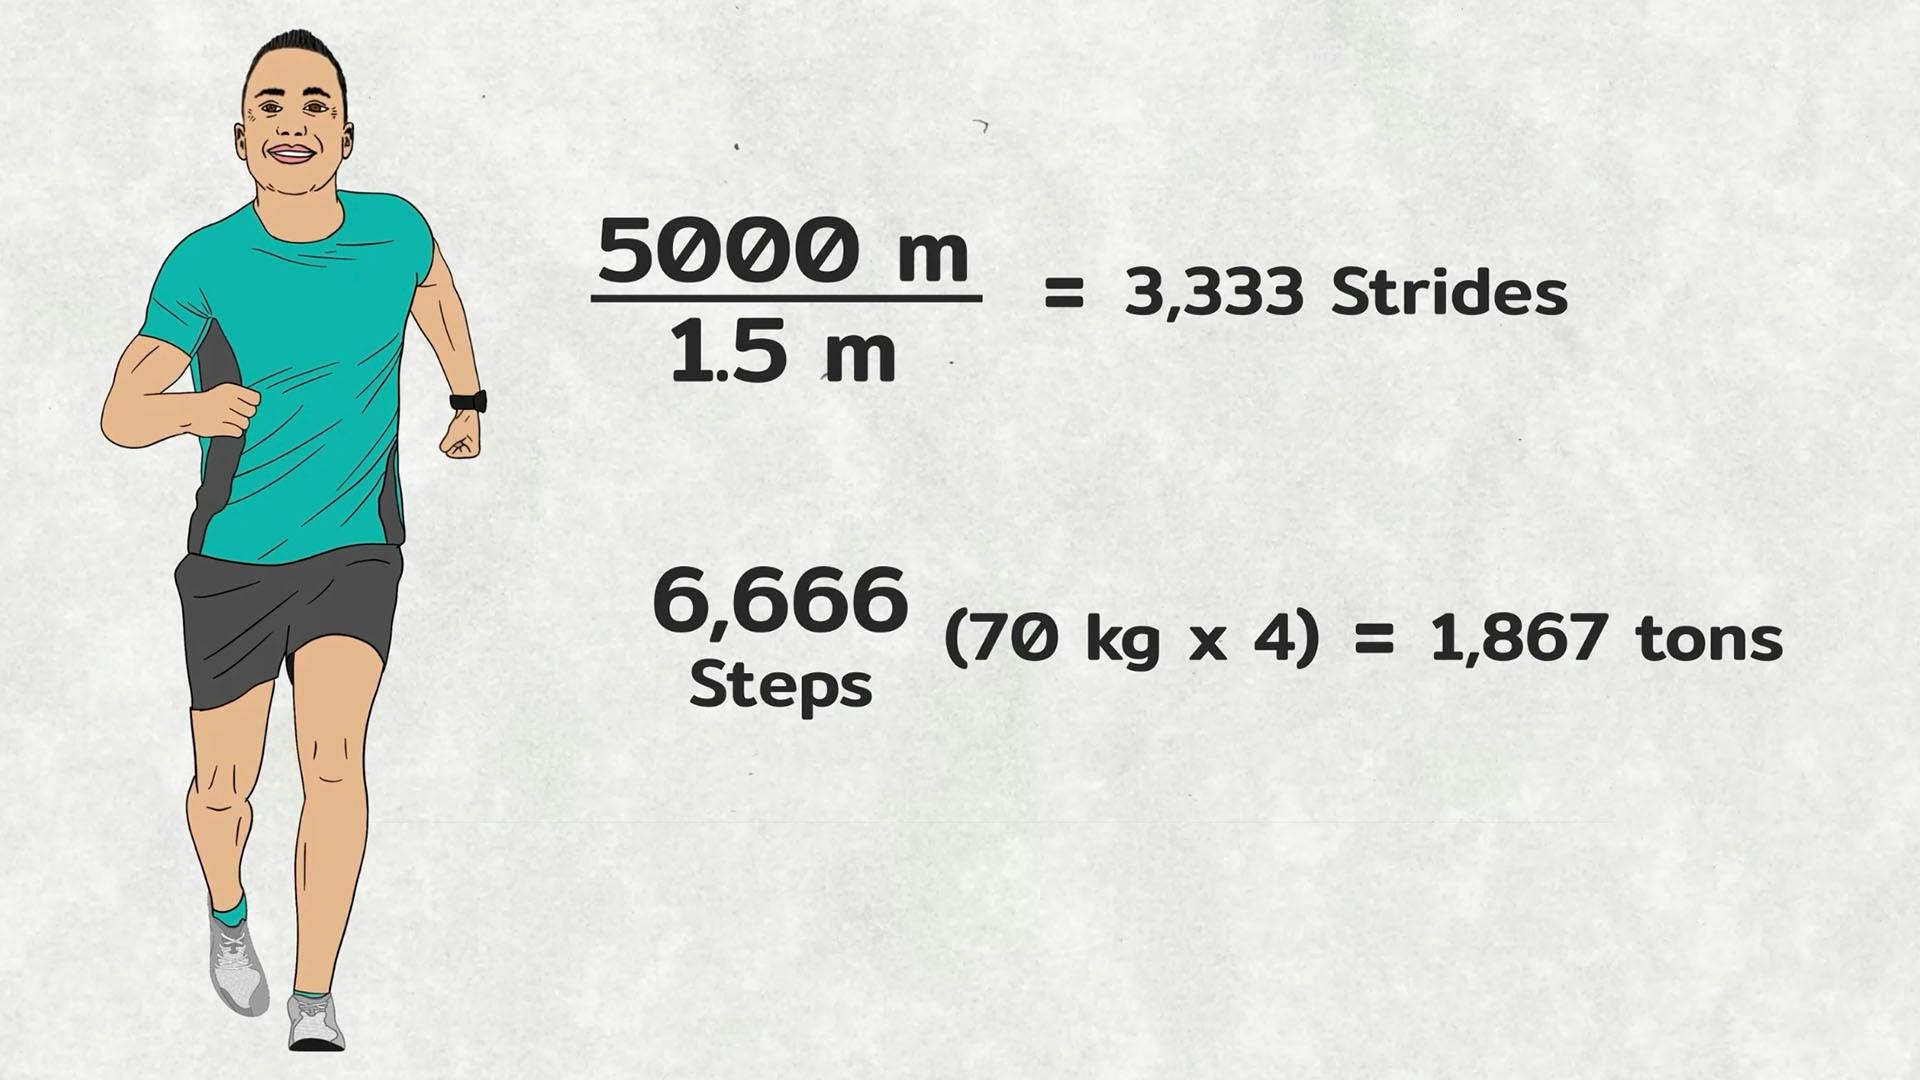 Calculation of the Accumulative Impact Force From a 5km Run